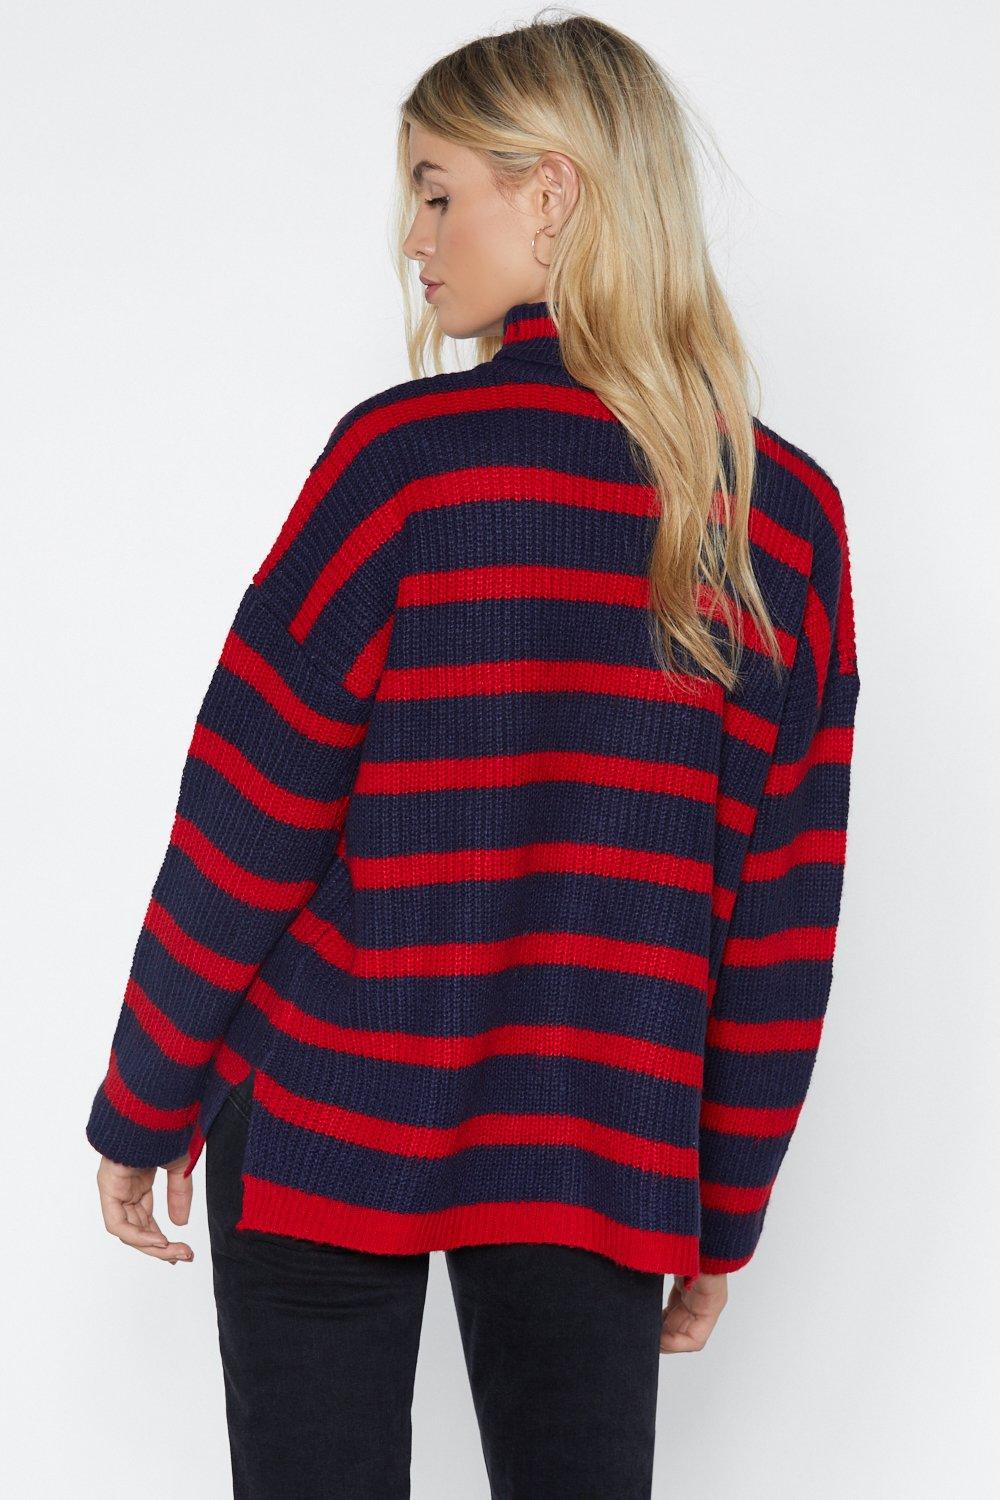 Straight From the Heart Turtleneck Sweater